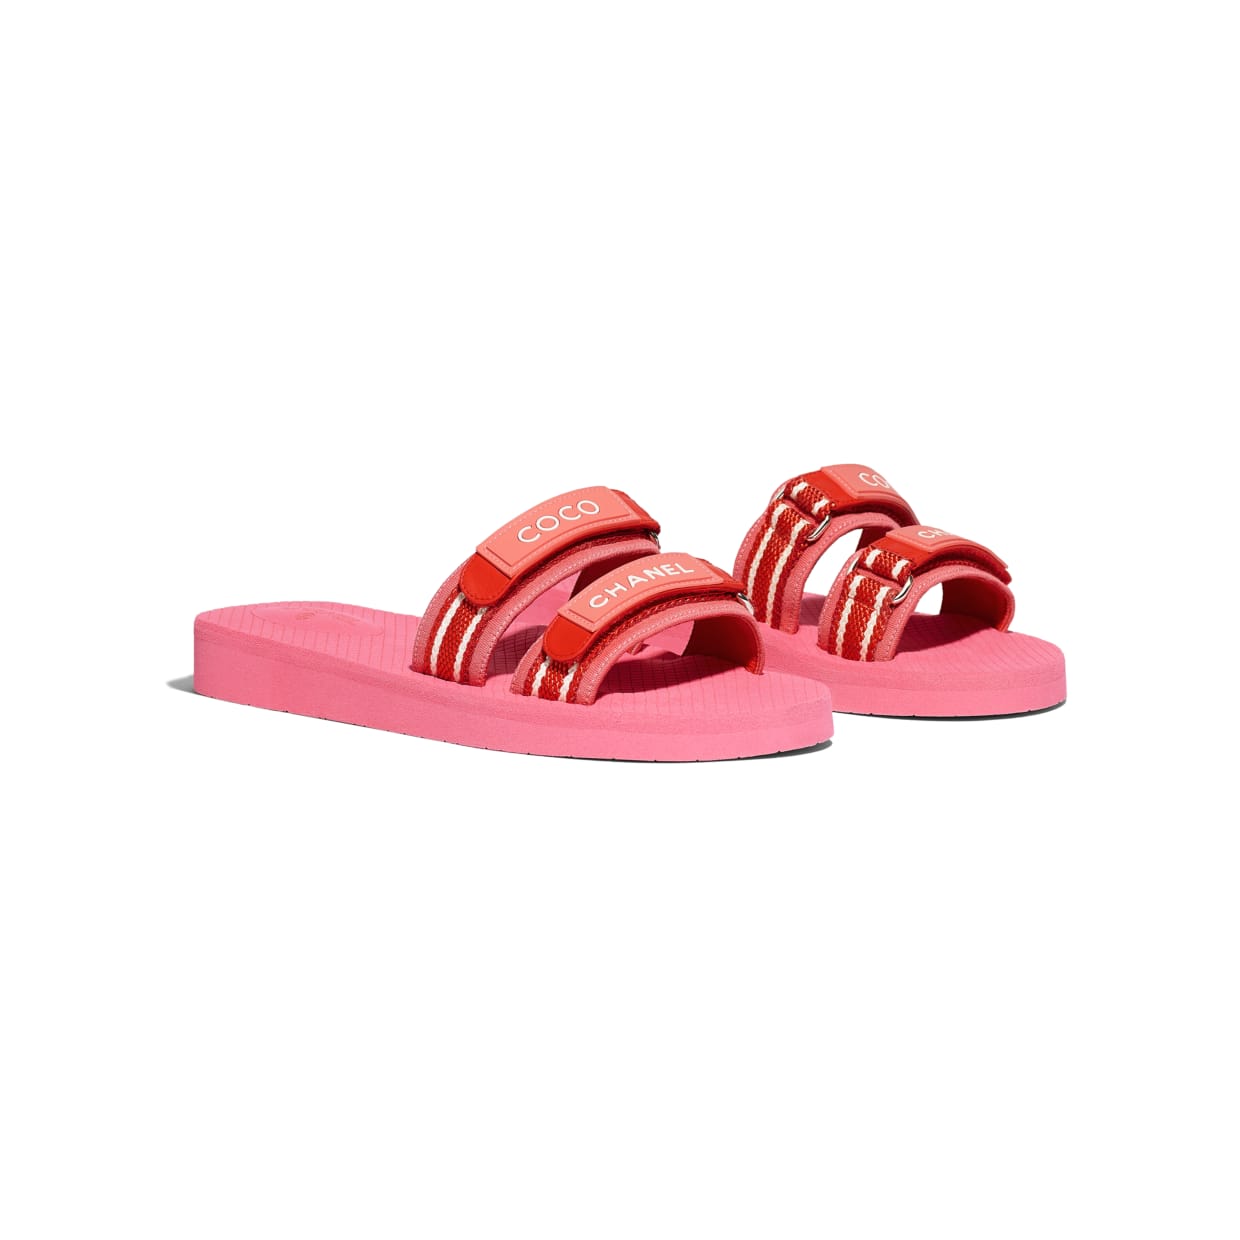 Chanel Sandals From Spring/Summer 2019 Act 2 Collection - Spotted